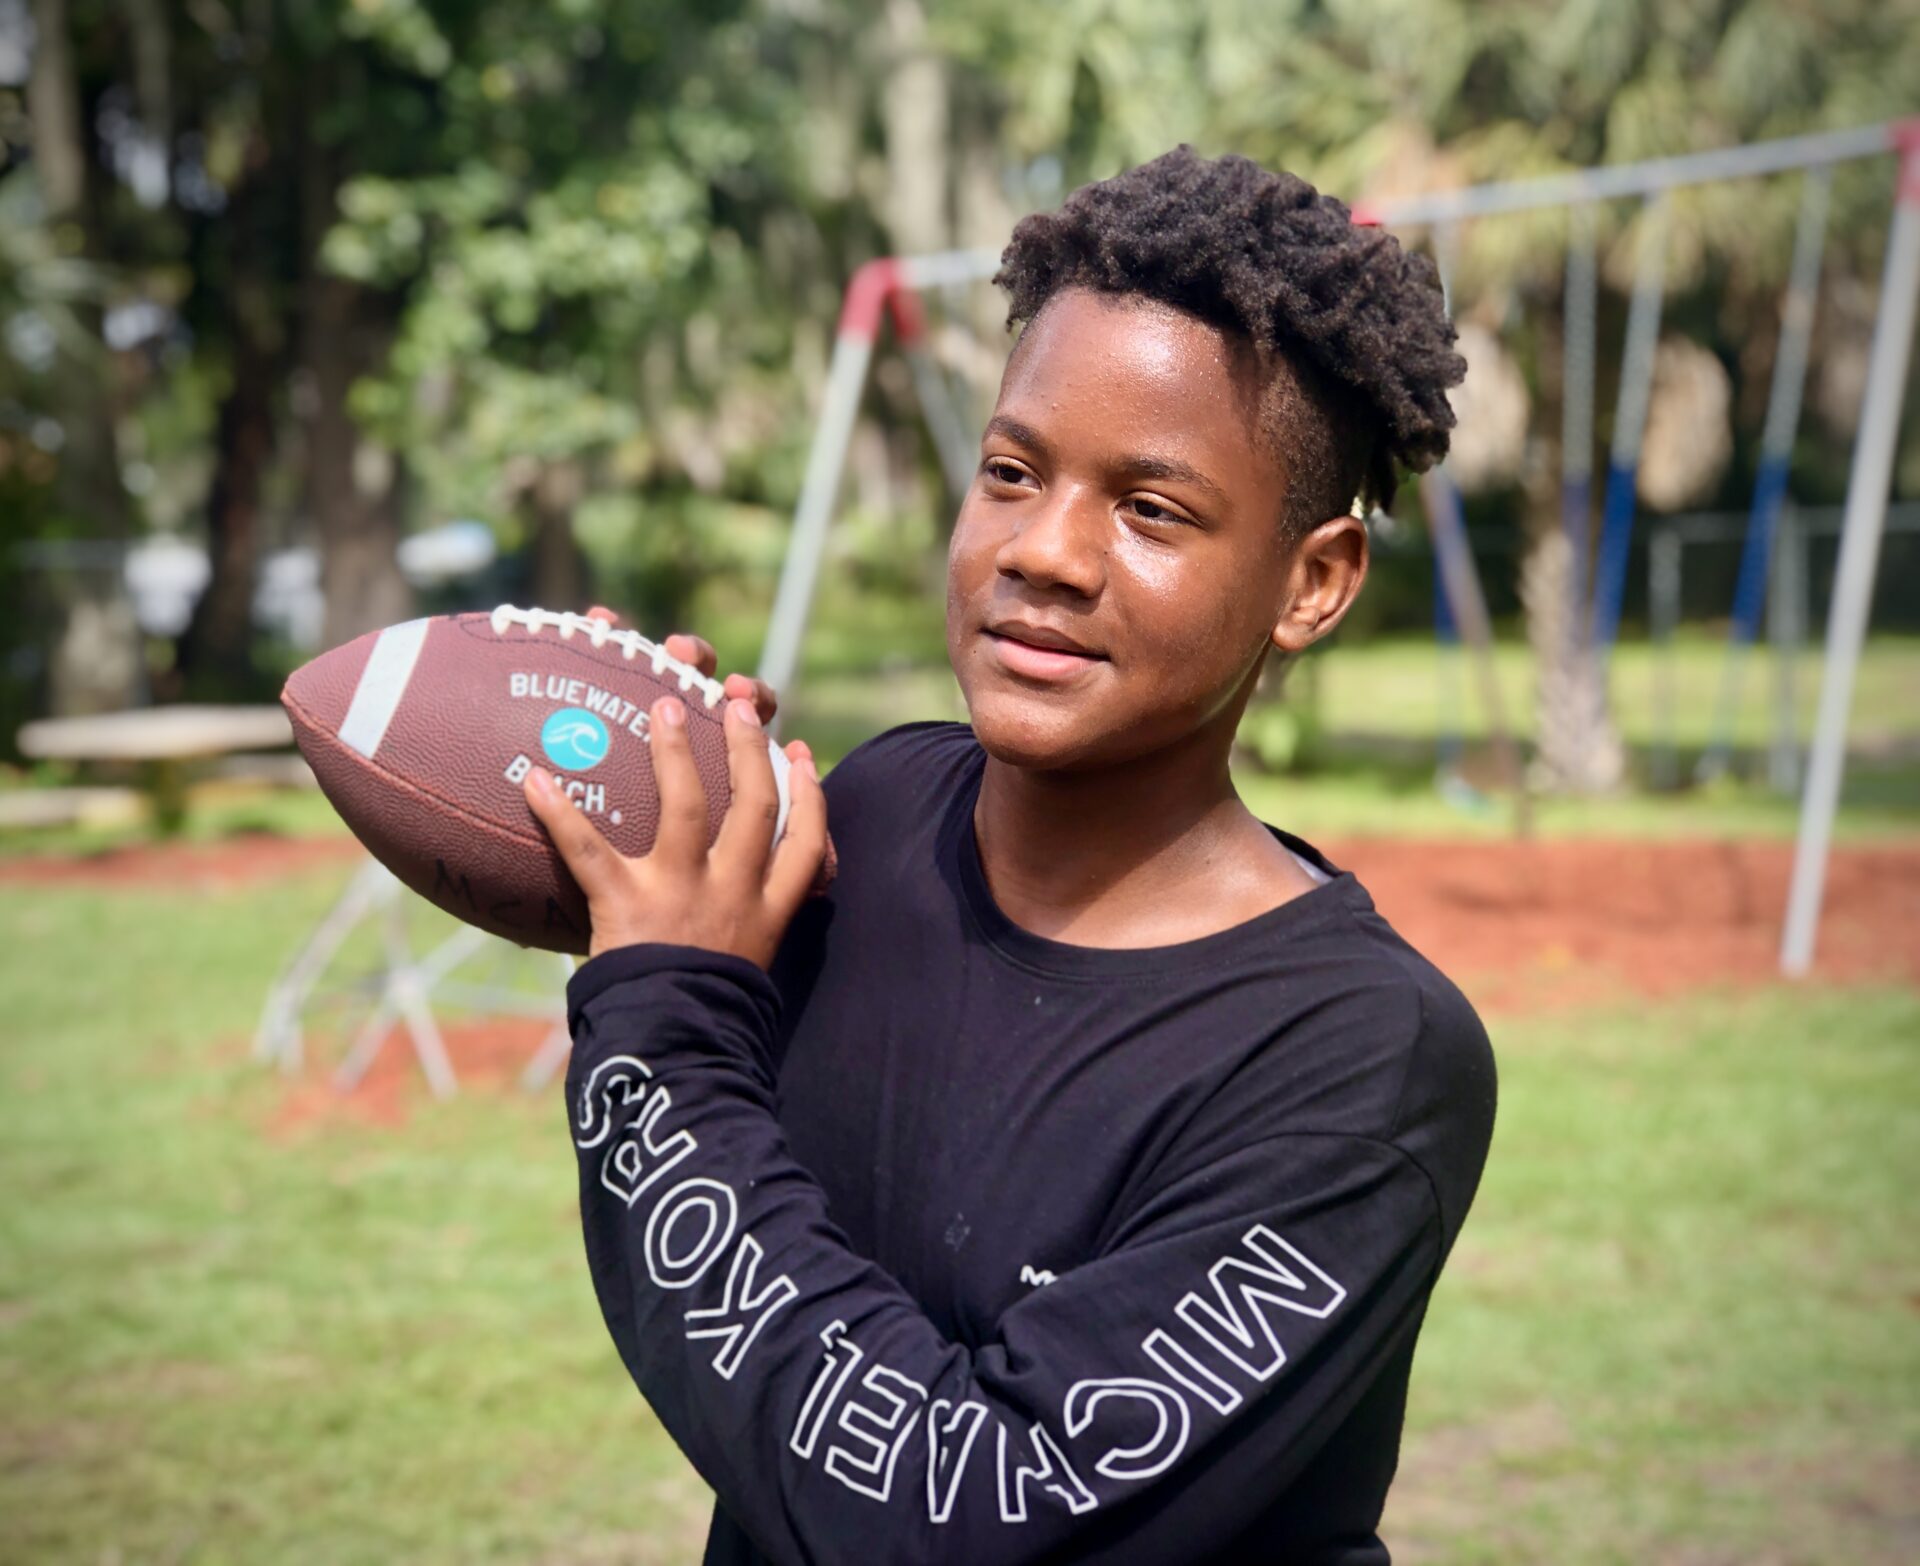 A young man holding a football in his hands.